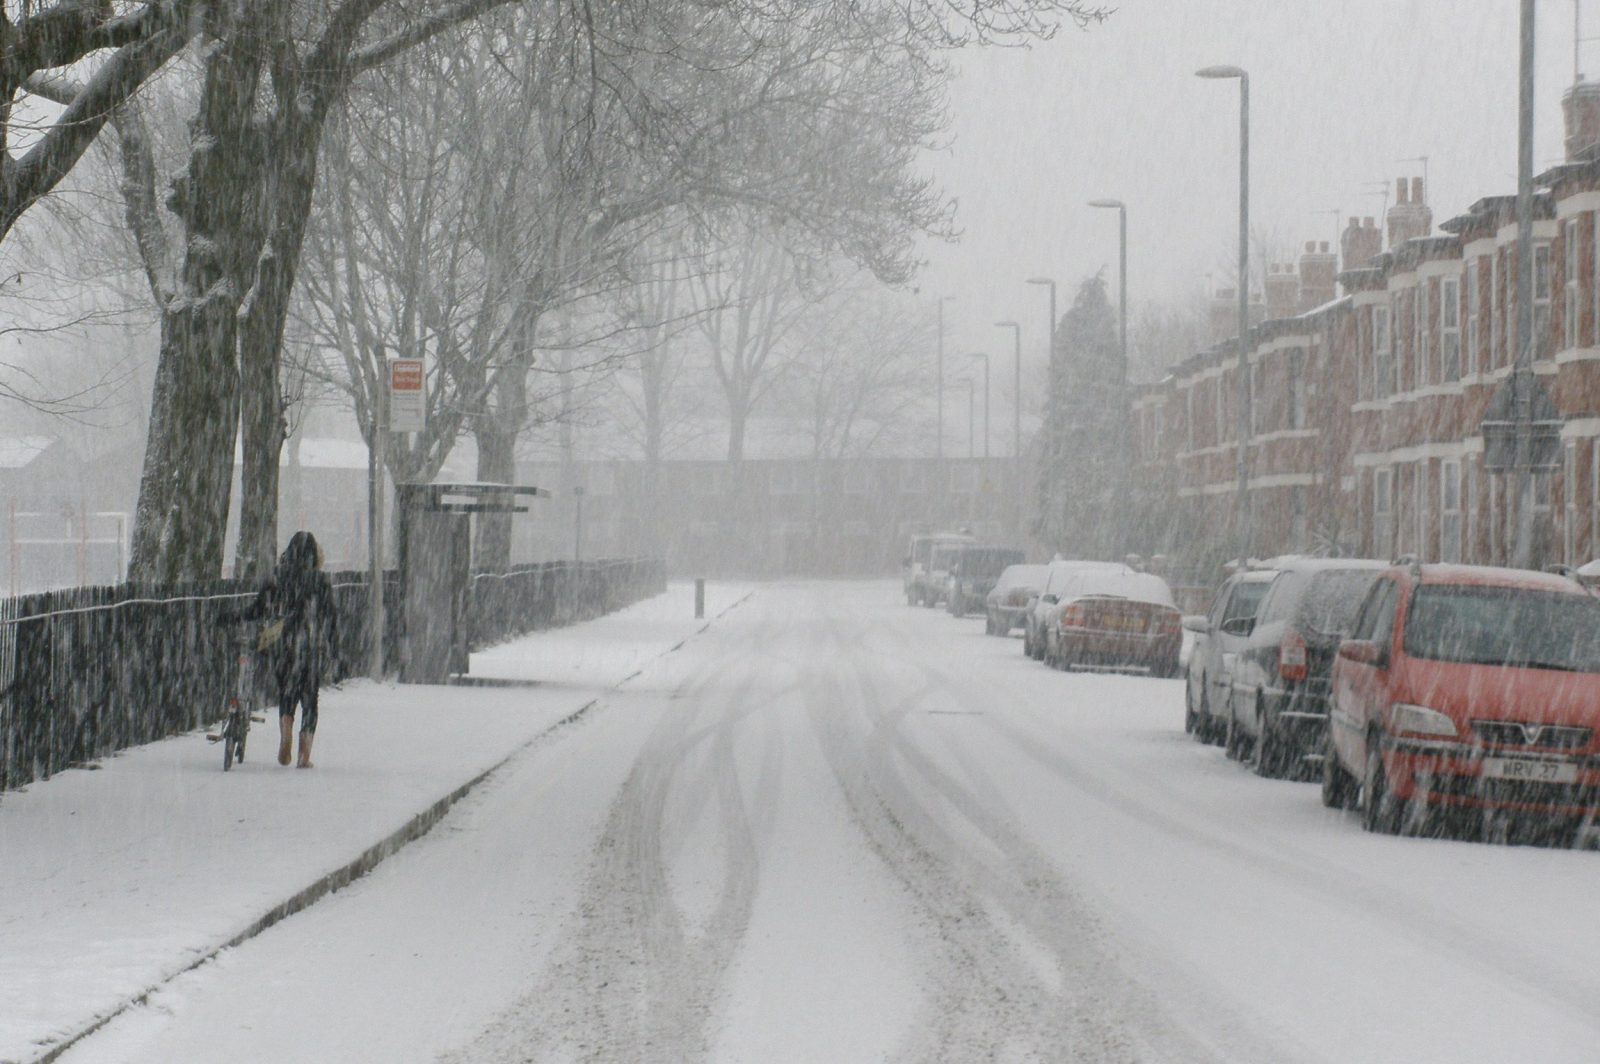 Spring heatwave in Manchester to come to an abrupt end with snow forecast this week, The Manc